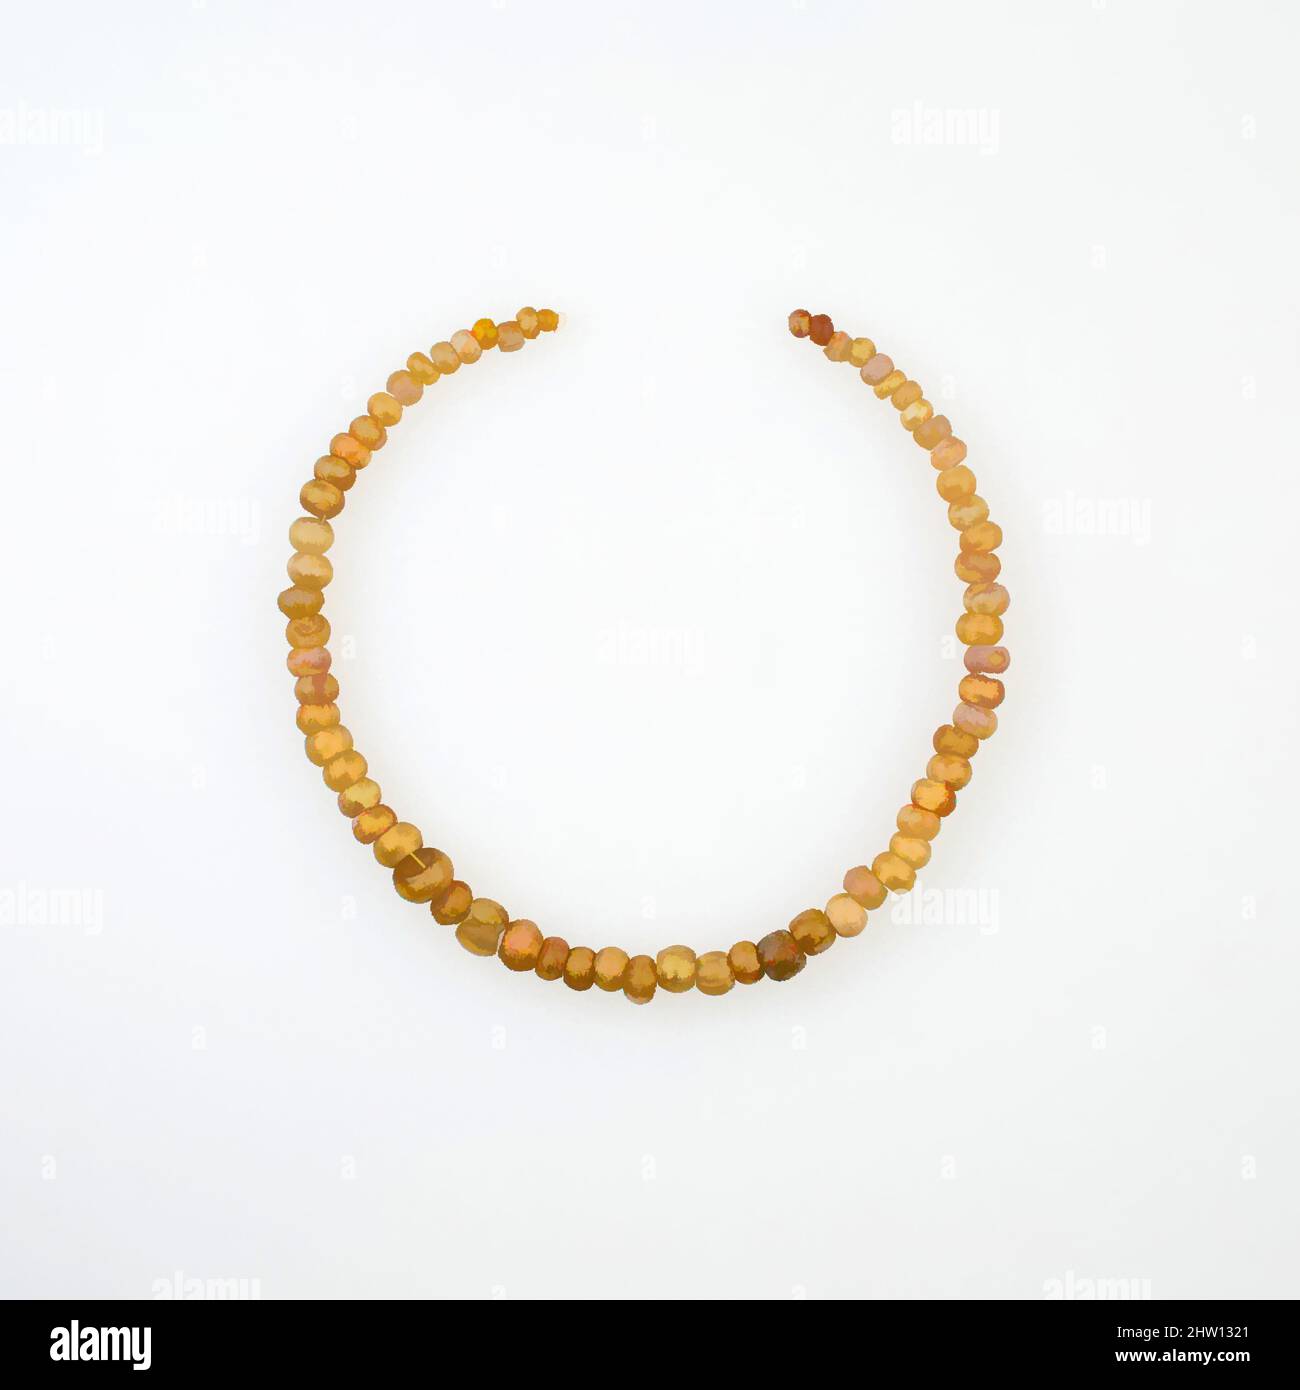 Art inspired by String of 65 Beads, Ptolemaic Period–Roman Period, 2nd century BC–2nd century AD, From Egypt, glass, gold foil, L. 33 cm (13 in.), Gold glass beads were a Hellenistic development. They were created by combining drawn tubes of colorless glass with gold foil. The earliest, Classic works modernized by Artotop with a splash of modernity. Shapes, color and value, eye-catching visual impact on art. Emotions through freedom of artworks in a contemporary way. A timeless message pursuing a wildly creative new direction. Artists turning to the digital medium and creating the Artotop NFT Stock Photo